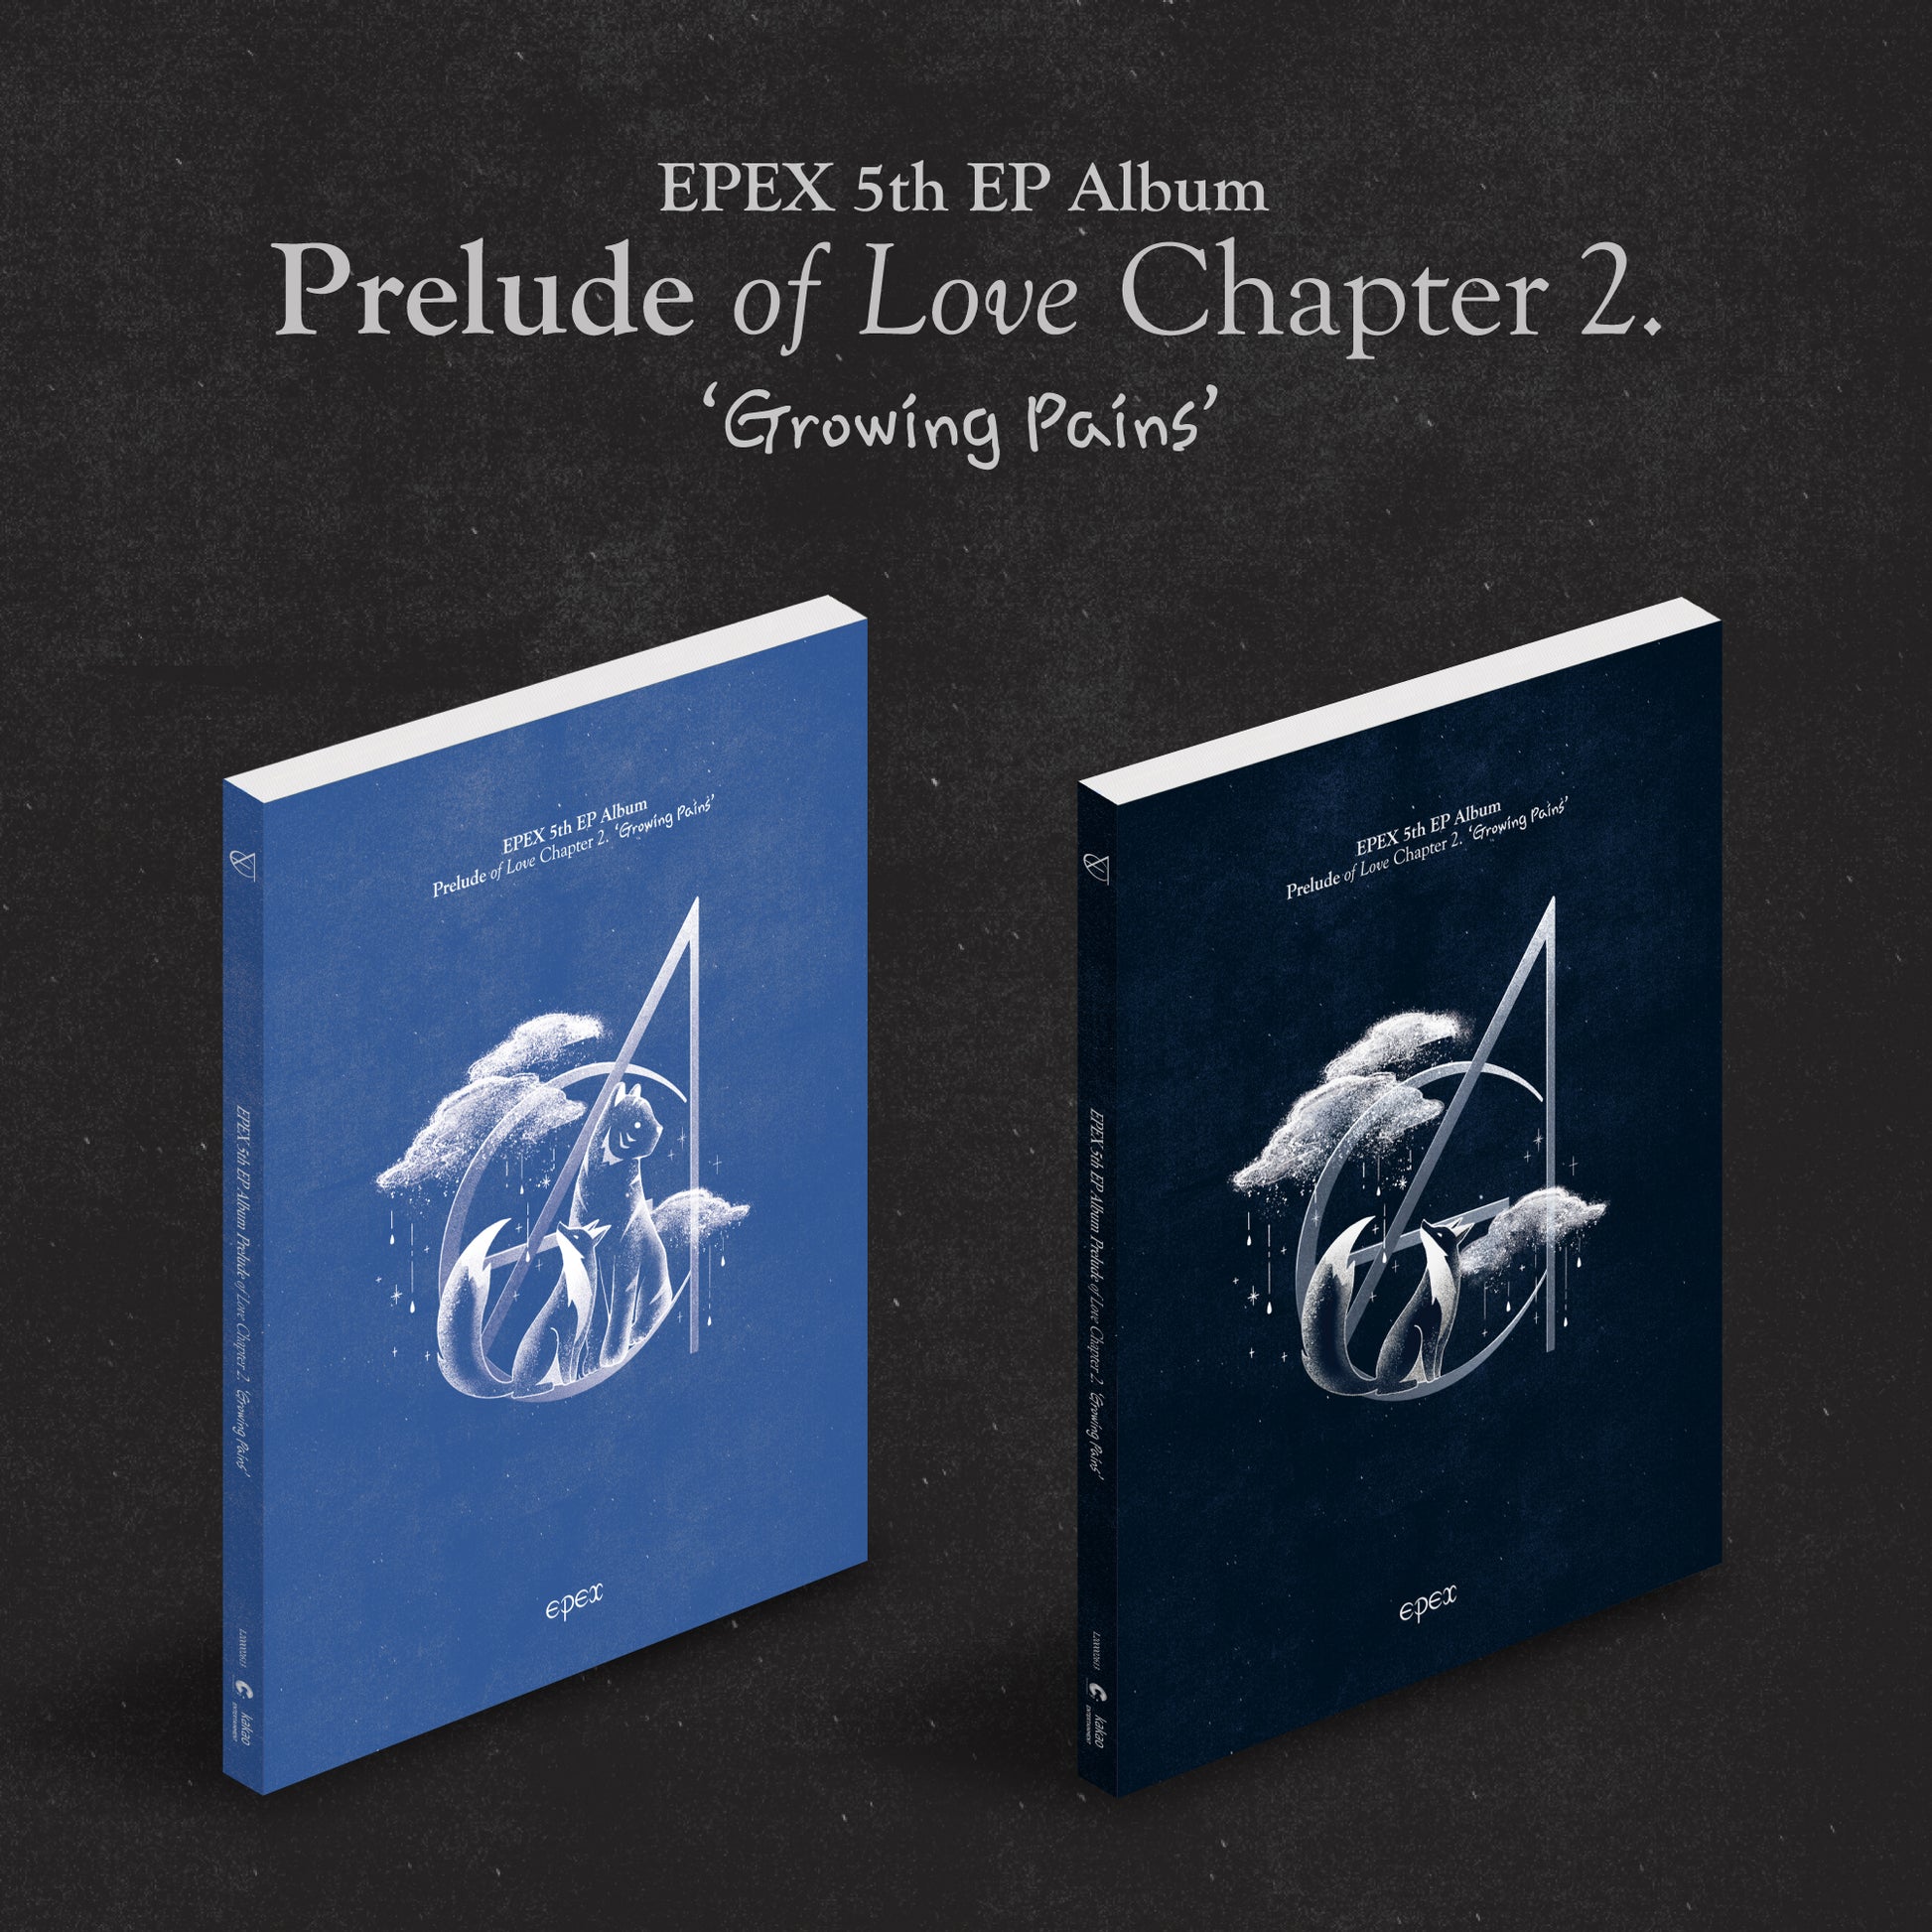 EPEX - 5TH EP ALBUM PRELUDE OF LOVE CHAPTER 2. GROWING PAINS